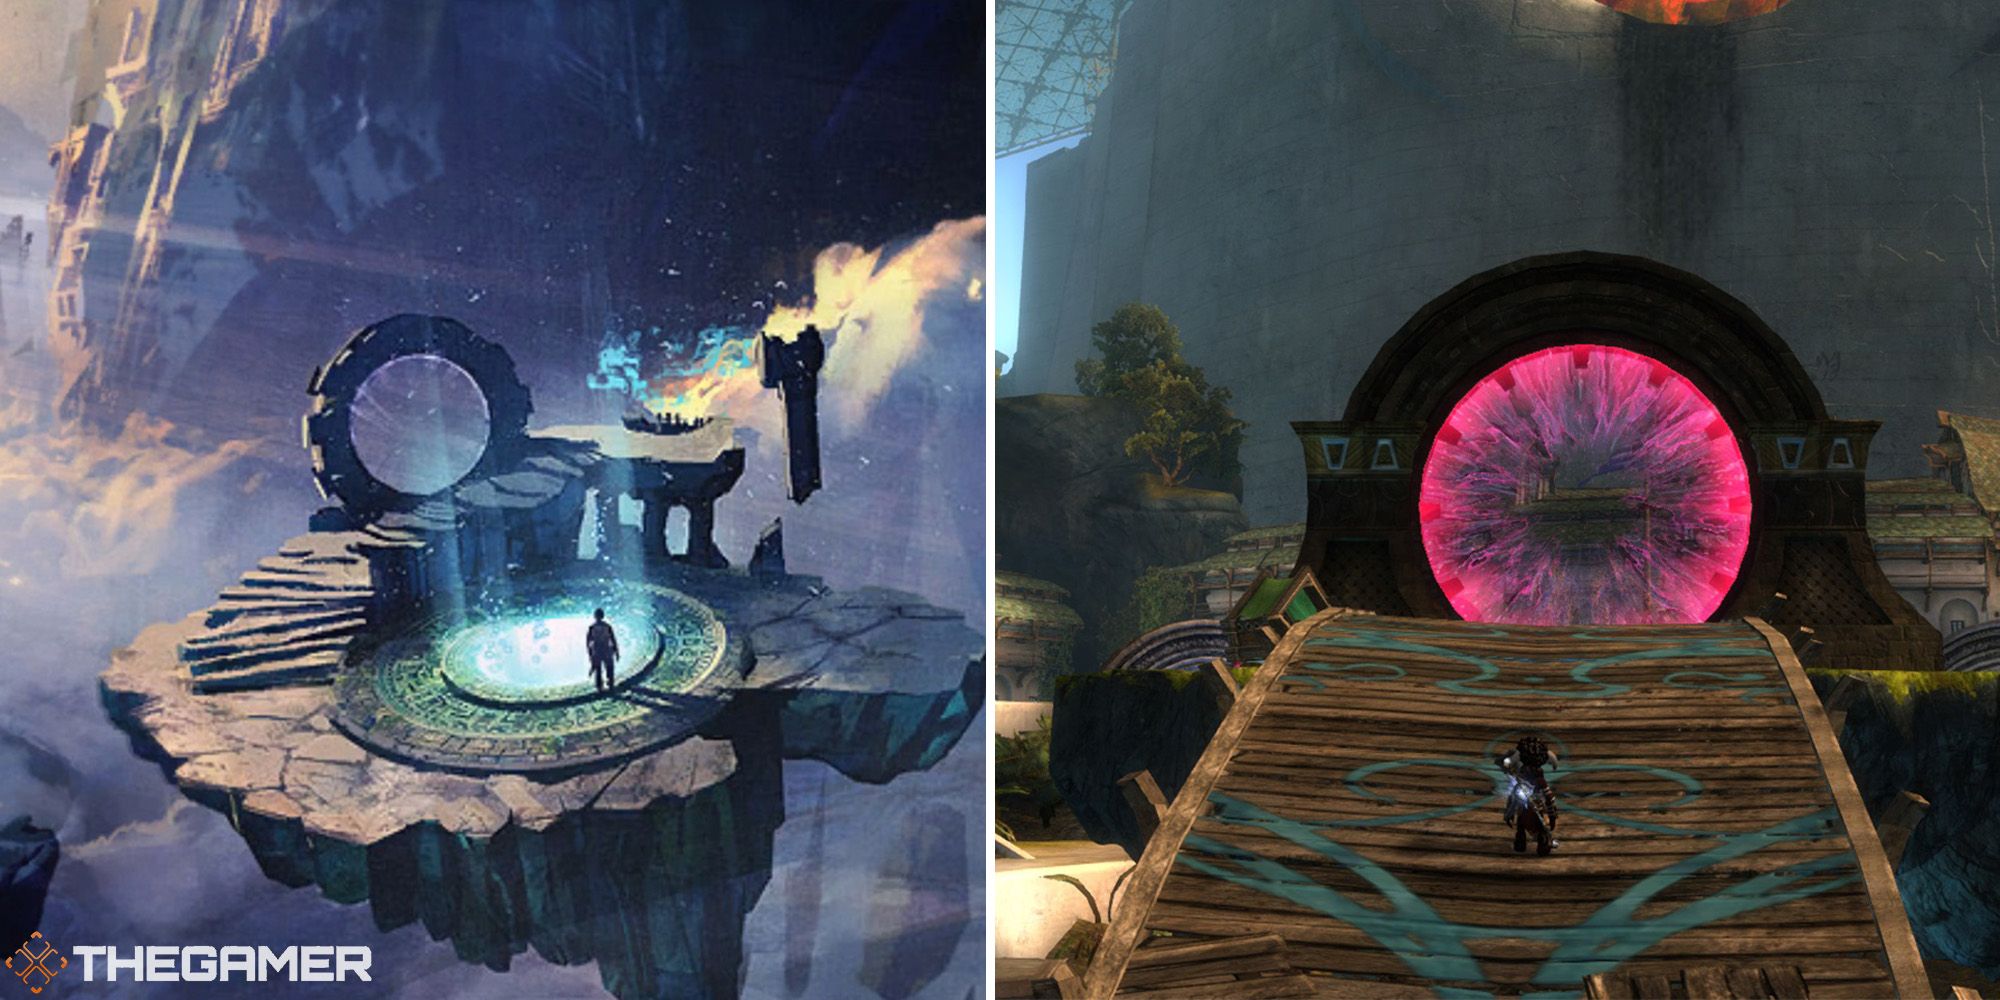 fractals loading art and entrance in lions arch split image